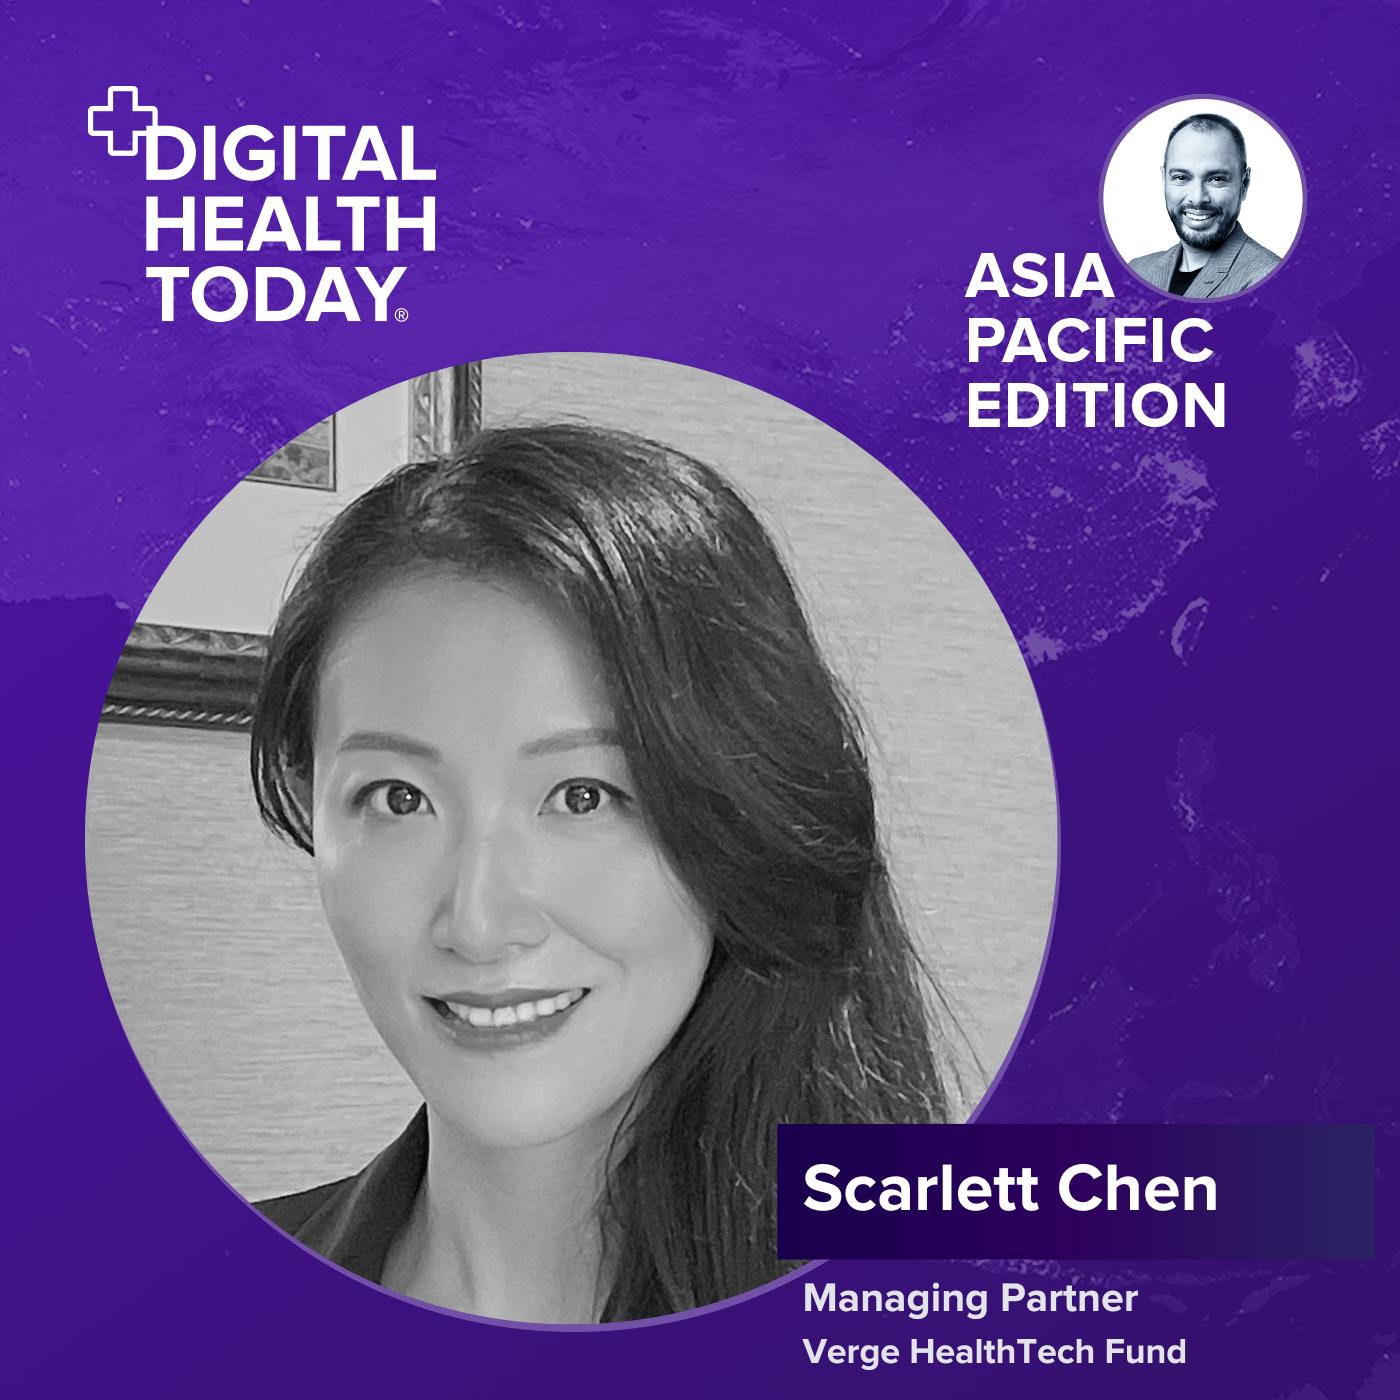 Ep24: What Trends and Challenges Lie Ahead for Health Tech Investment? Insights from Scarlett Chen.